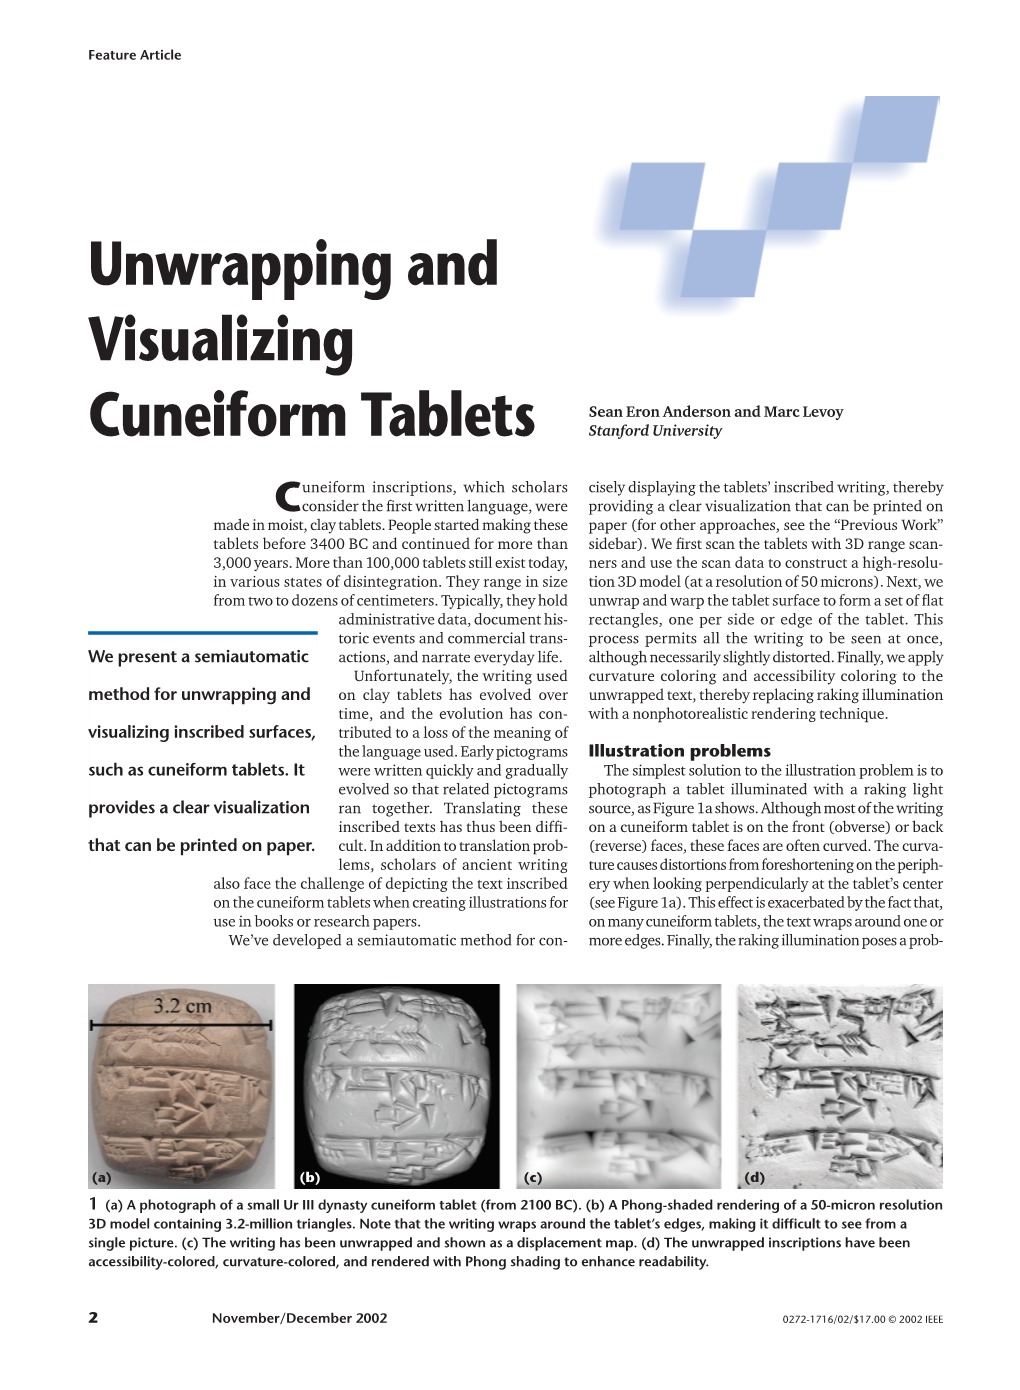 Unwrapping and Visualizing Cuneiform Tablets